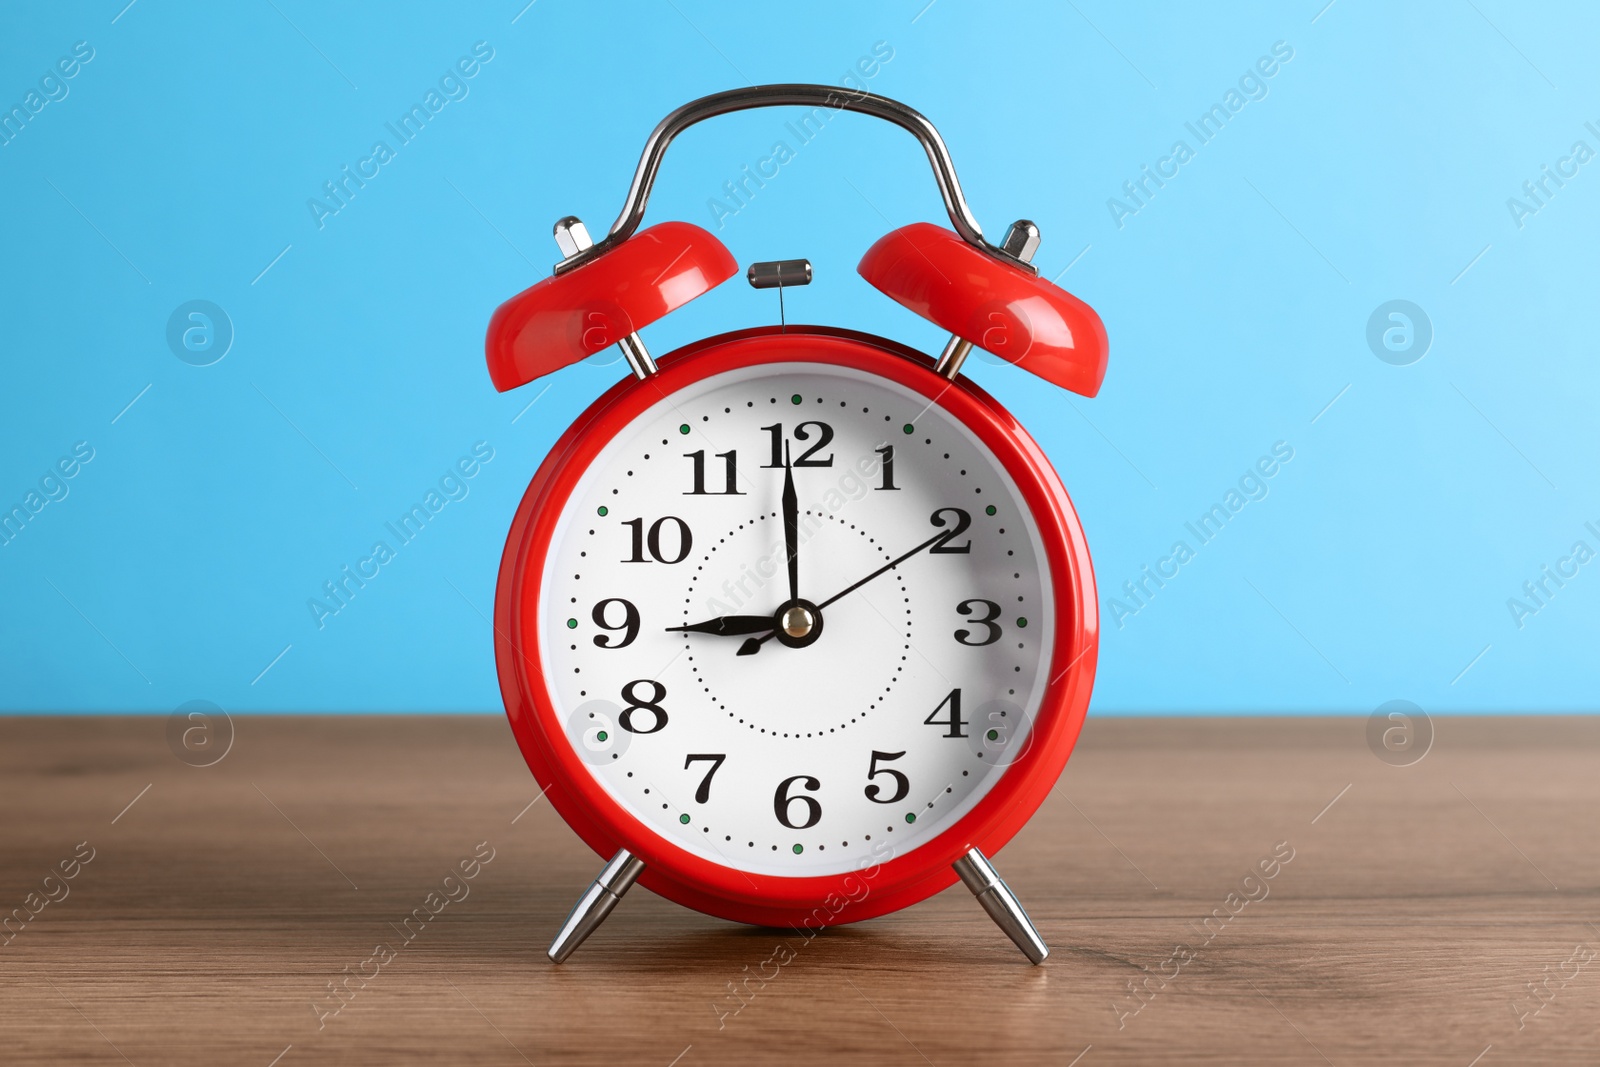 Photo of Red alarm clock on wooden table against light blue background